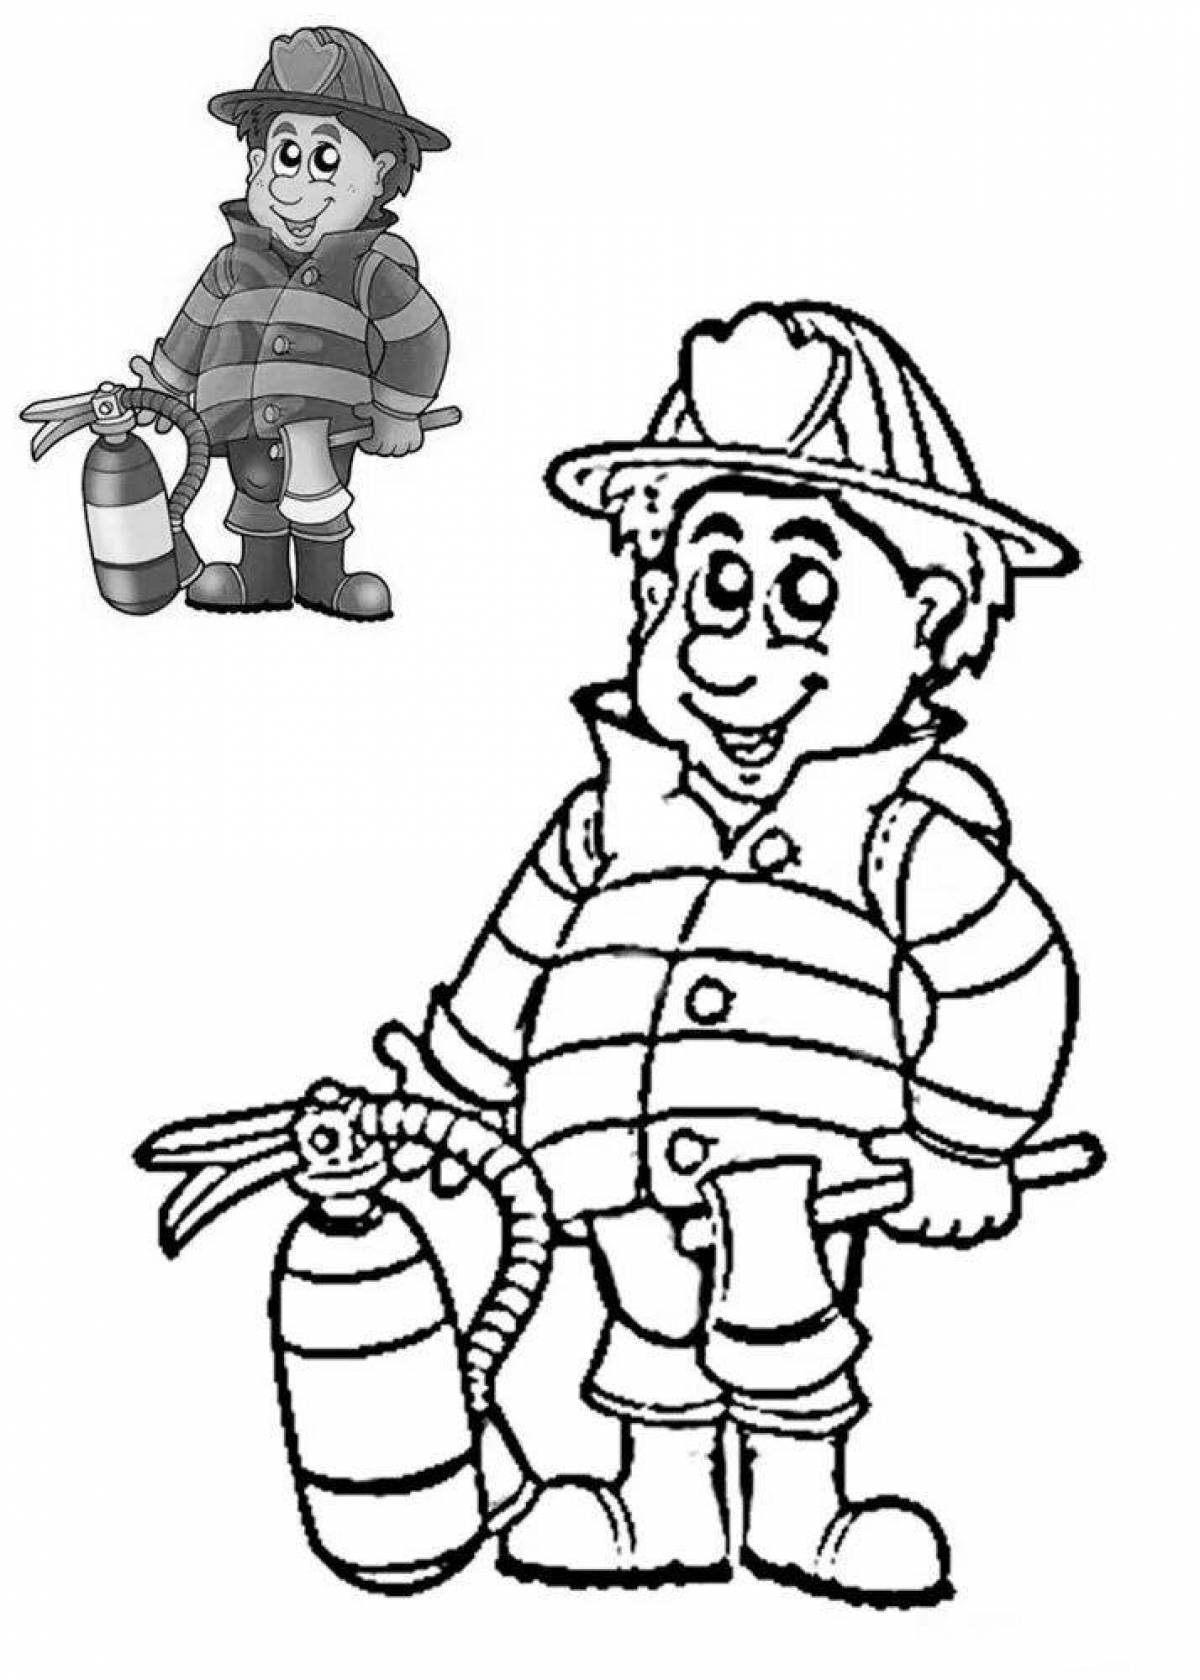 Coloring page adorable firefighter profession